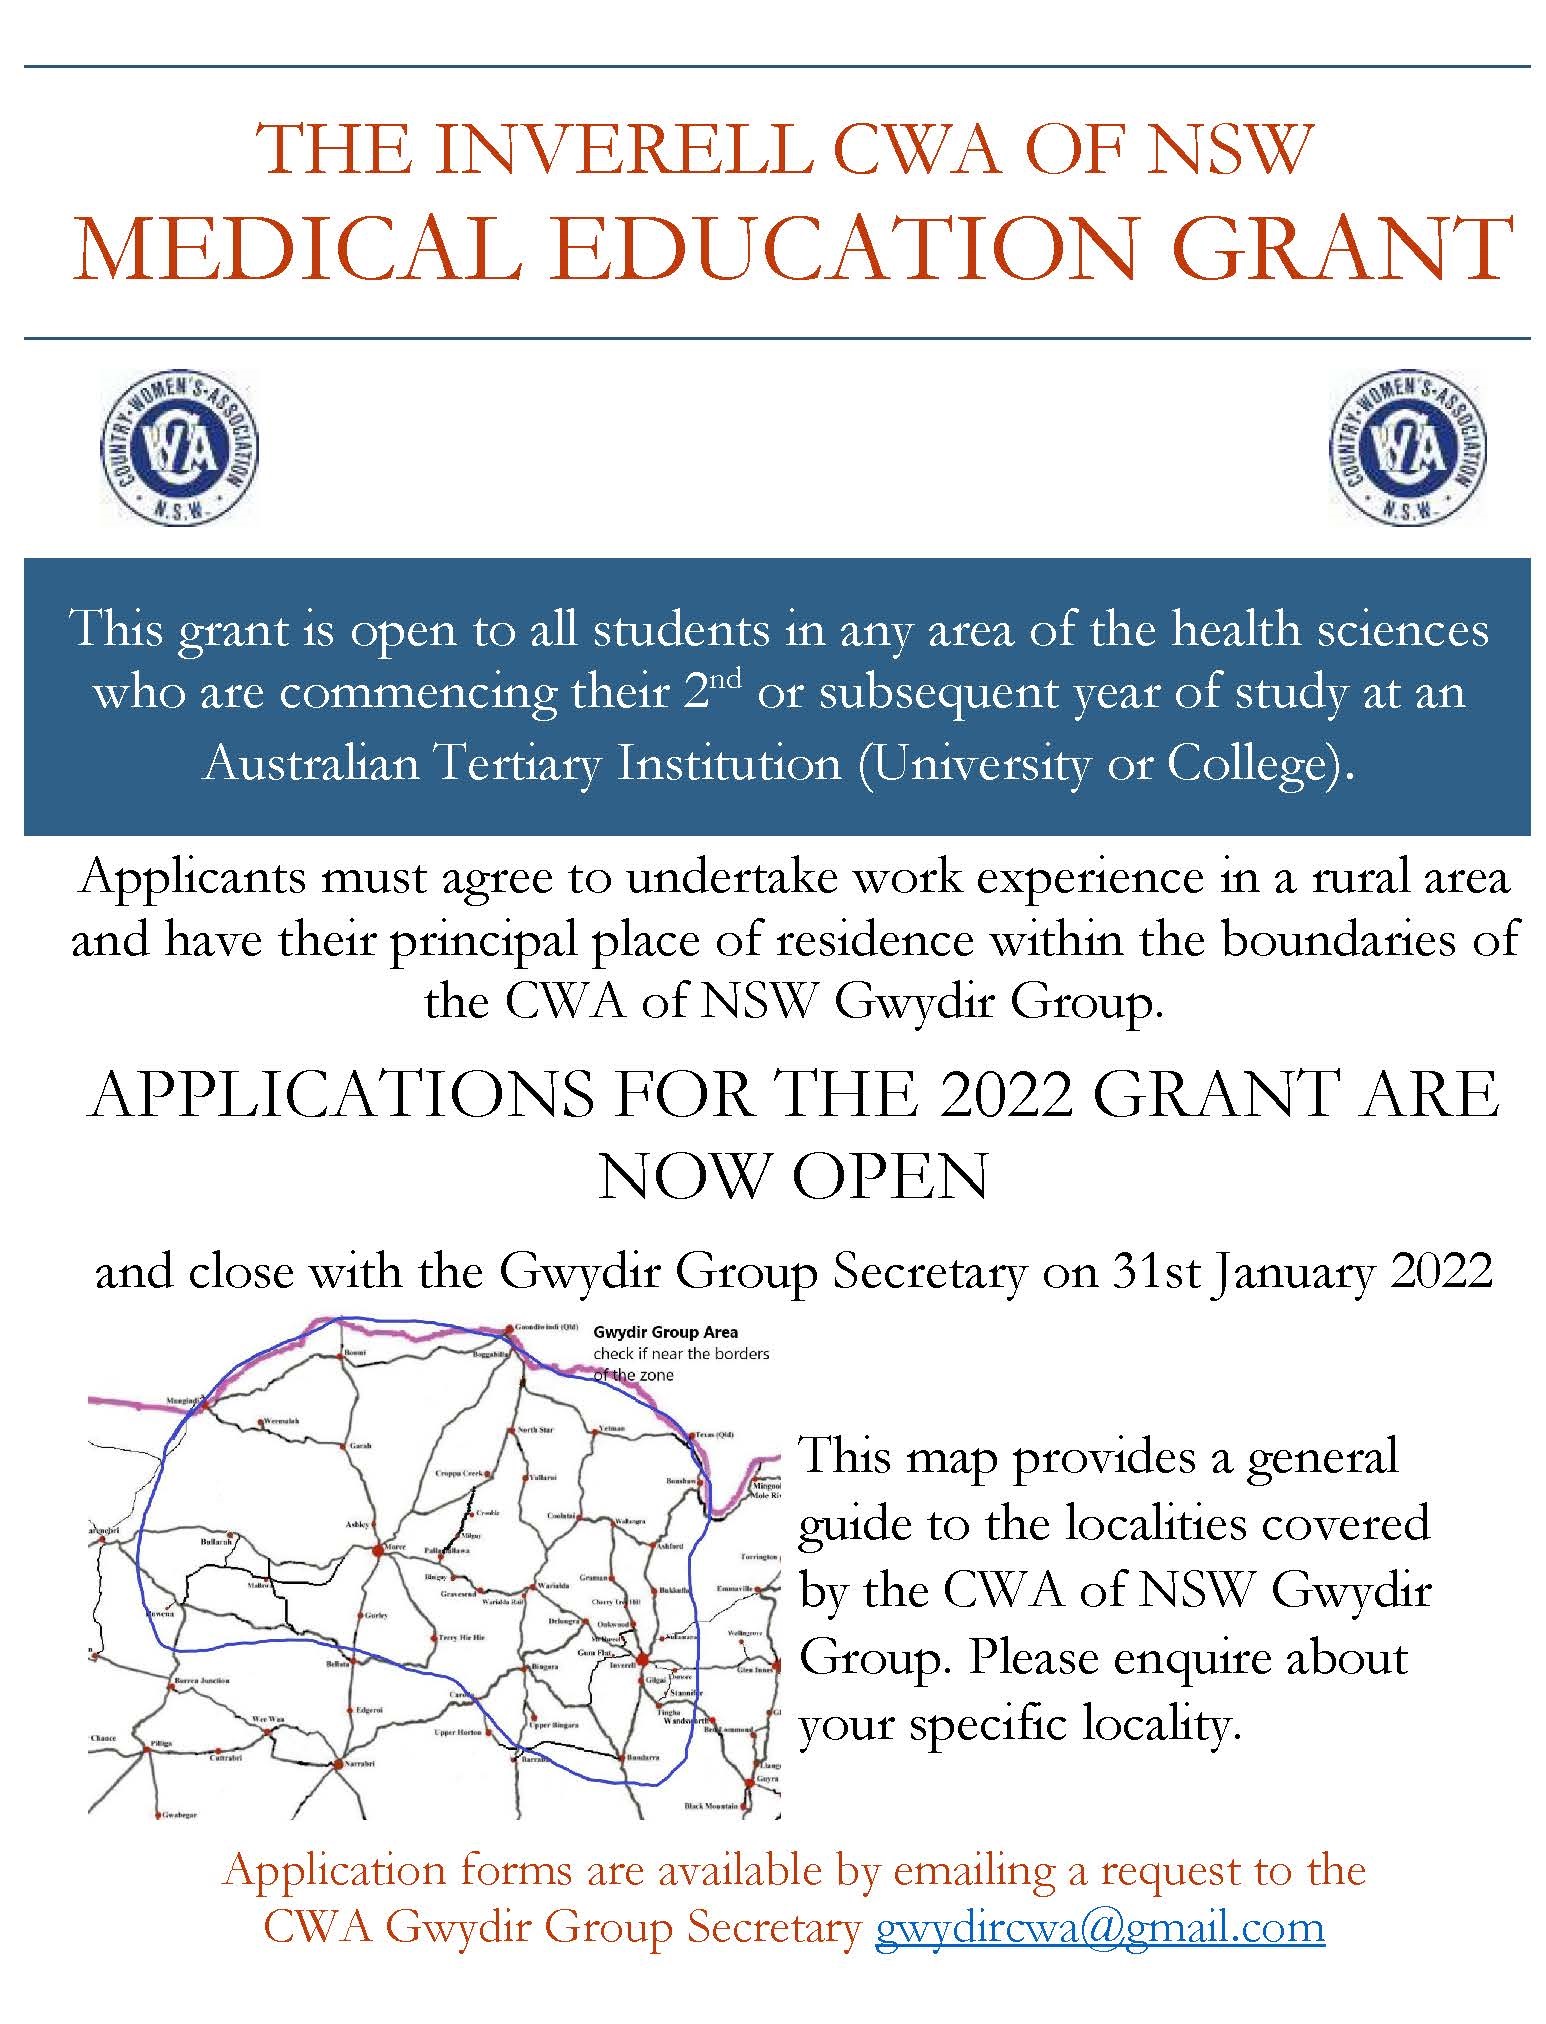 Pages from Medical Grant Flyer 21 MOD.jpg